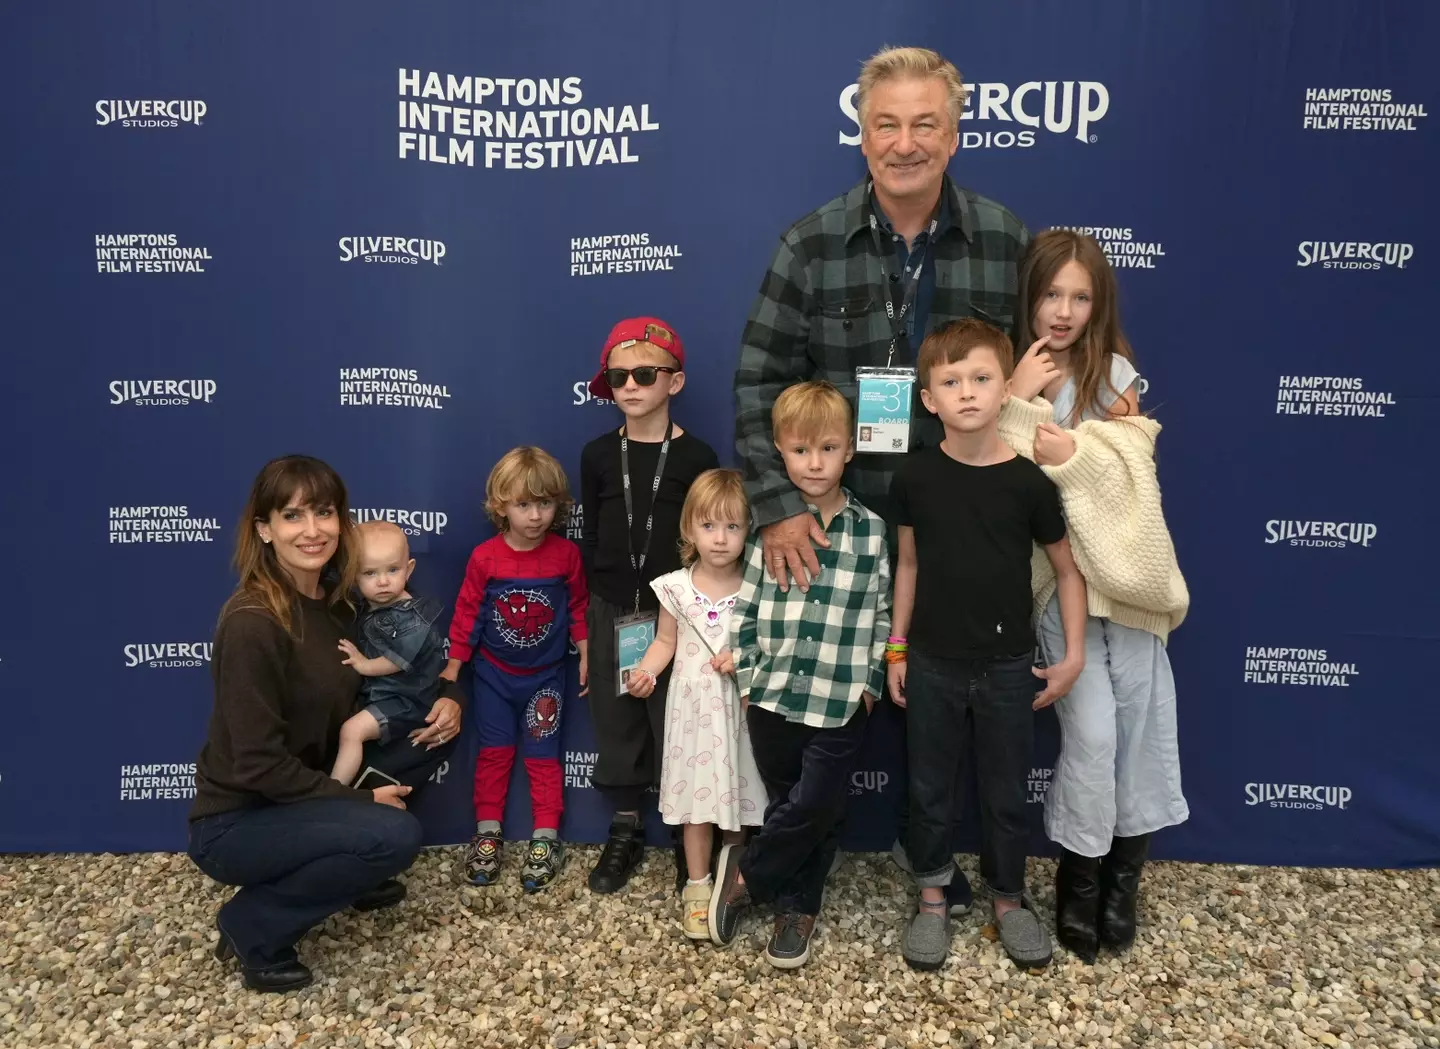 The family attended the Hamptons International Film Festival as a party of nine for the first time.